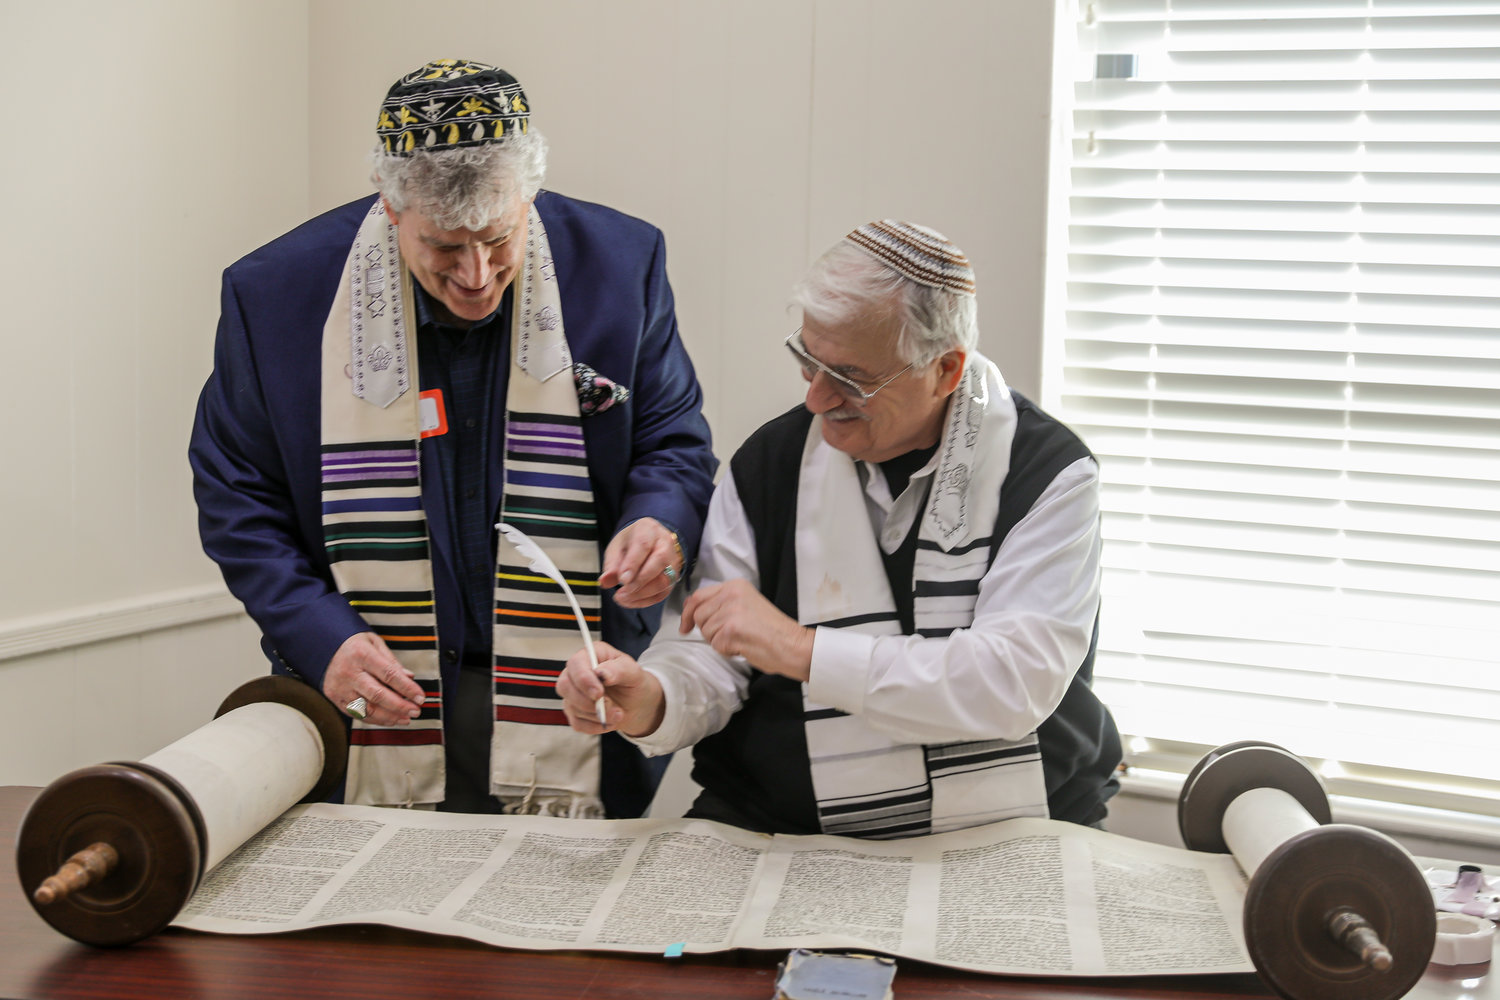 World-renowned sofer Neil H. Yerman conducted the event with congregation member Ed Paley.